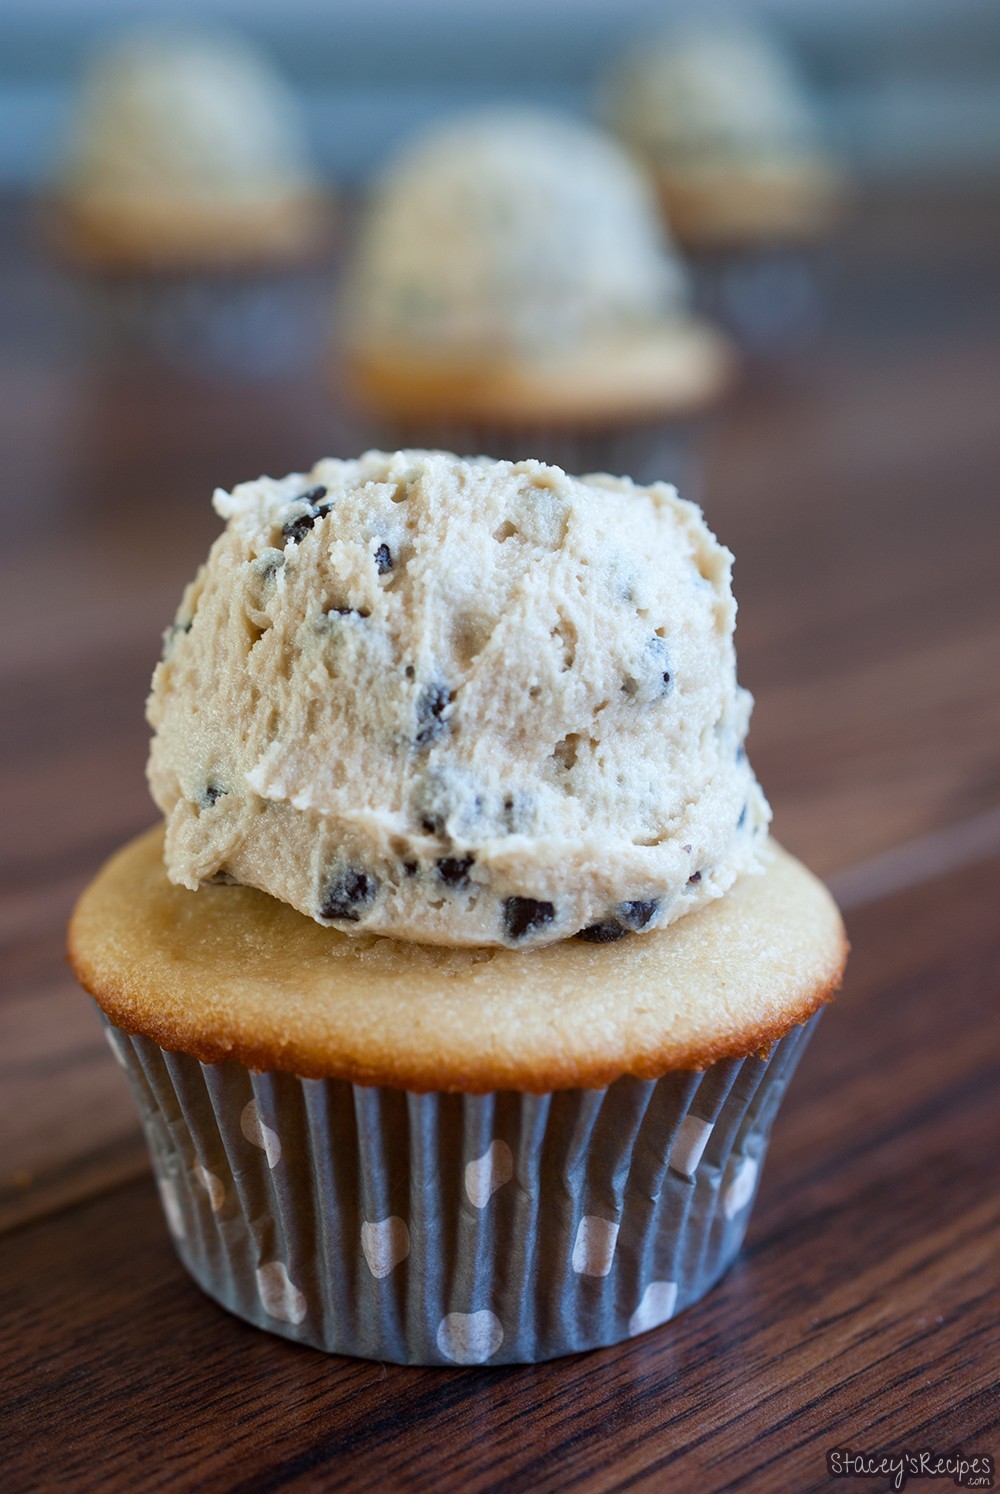 Vanilla Cupcakes with Cookie Dough Frosting